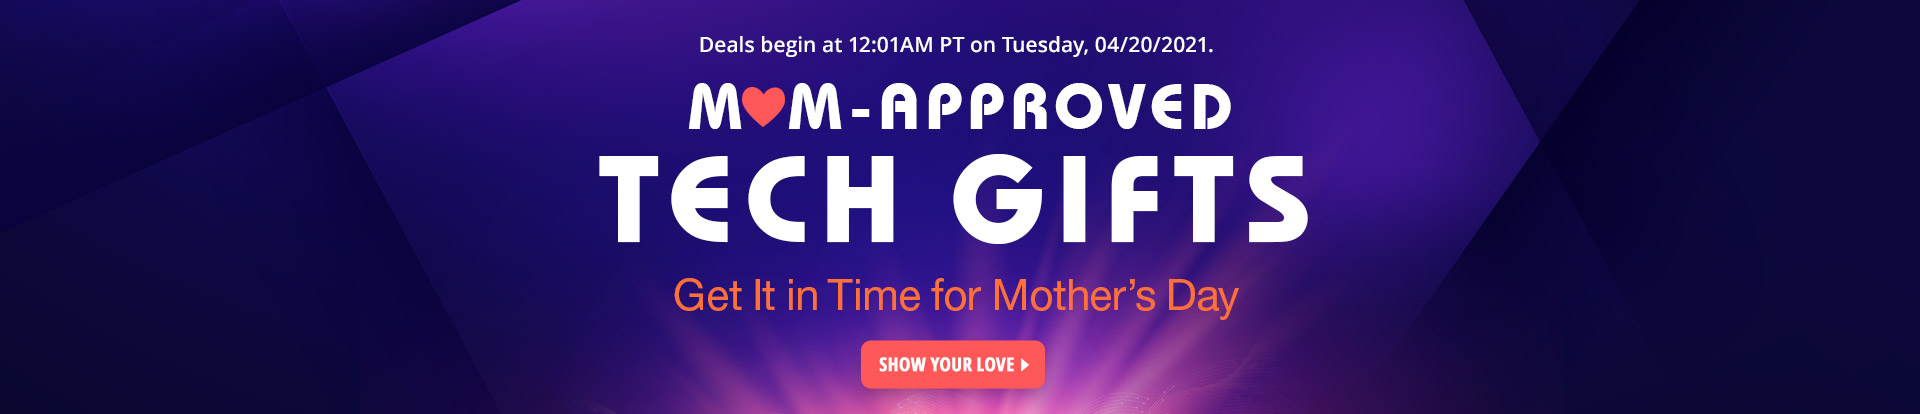 Mom Approved Tech Gifts Corporate Deals